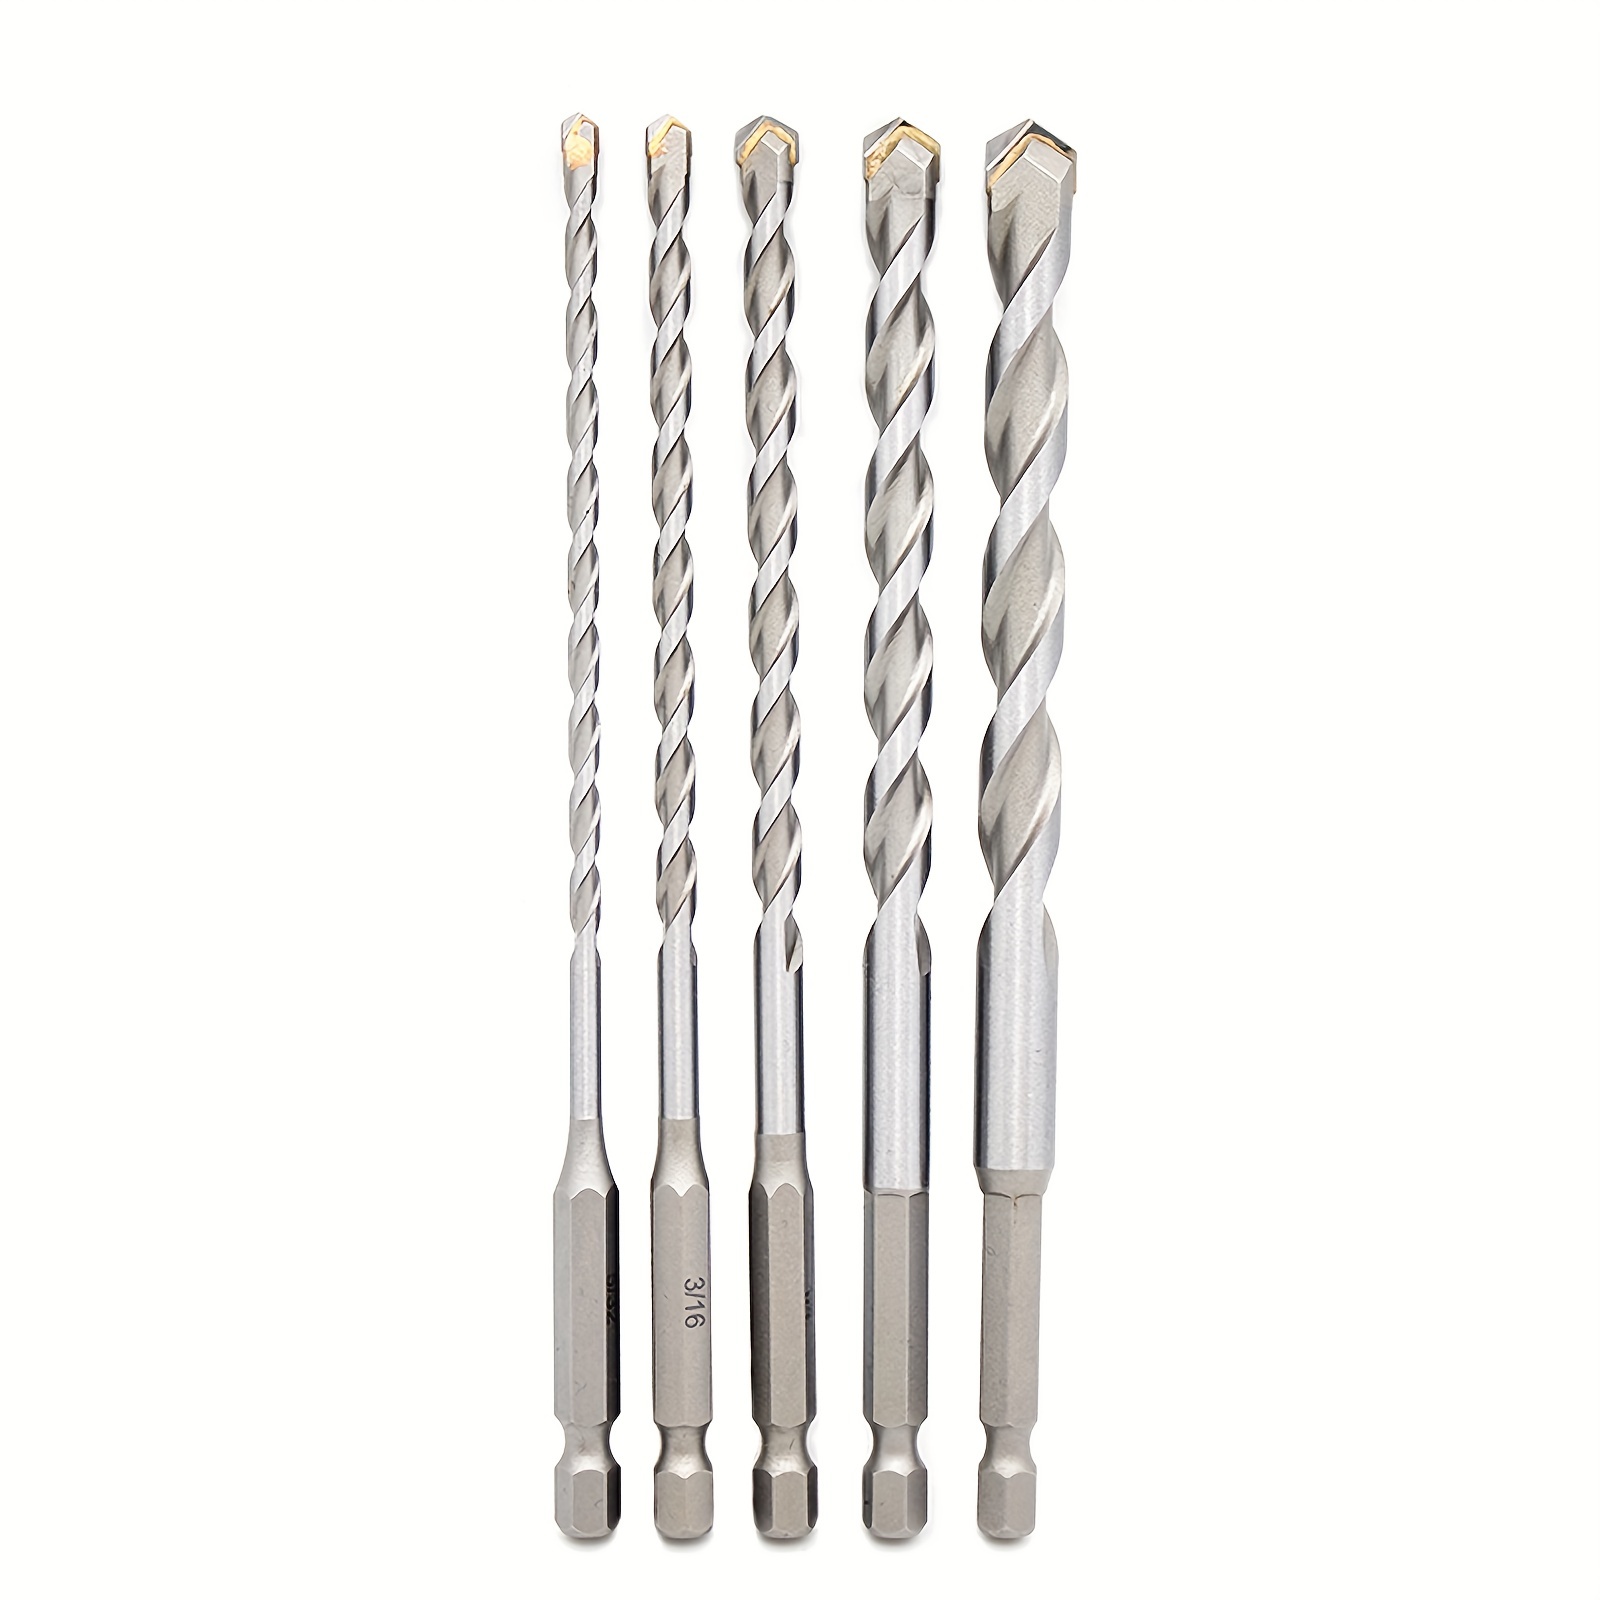 SDS-PLUS Rotary Hammer Drill Bits Set of 9, 3/16 - 5/8 Rock Carbide  Masonry Drill Bit Set for 3/4 inch SDS-PLUS Rotary Hammer : :  Tools & Home Improvement